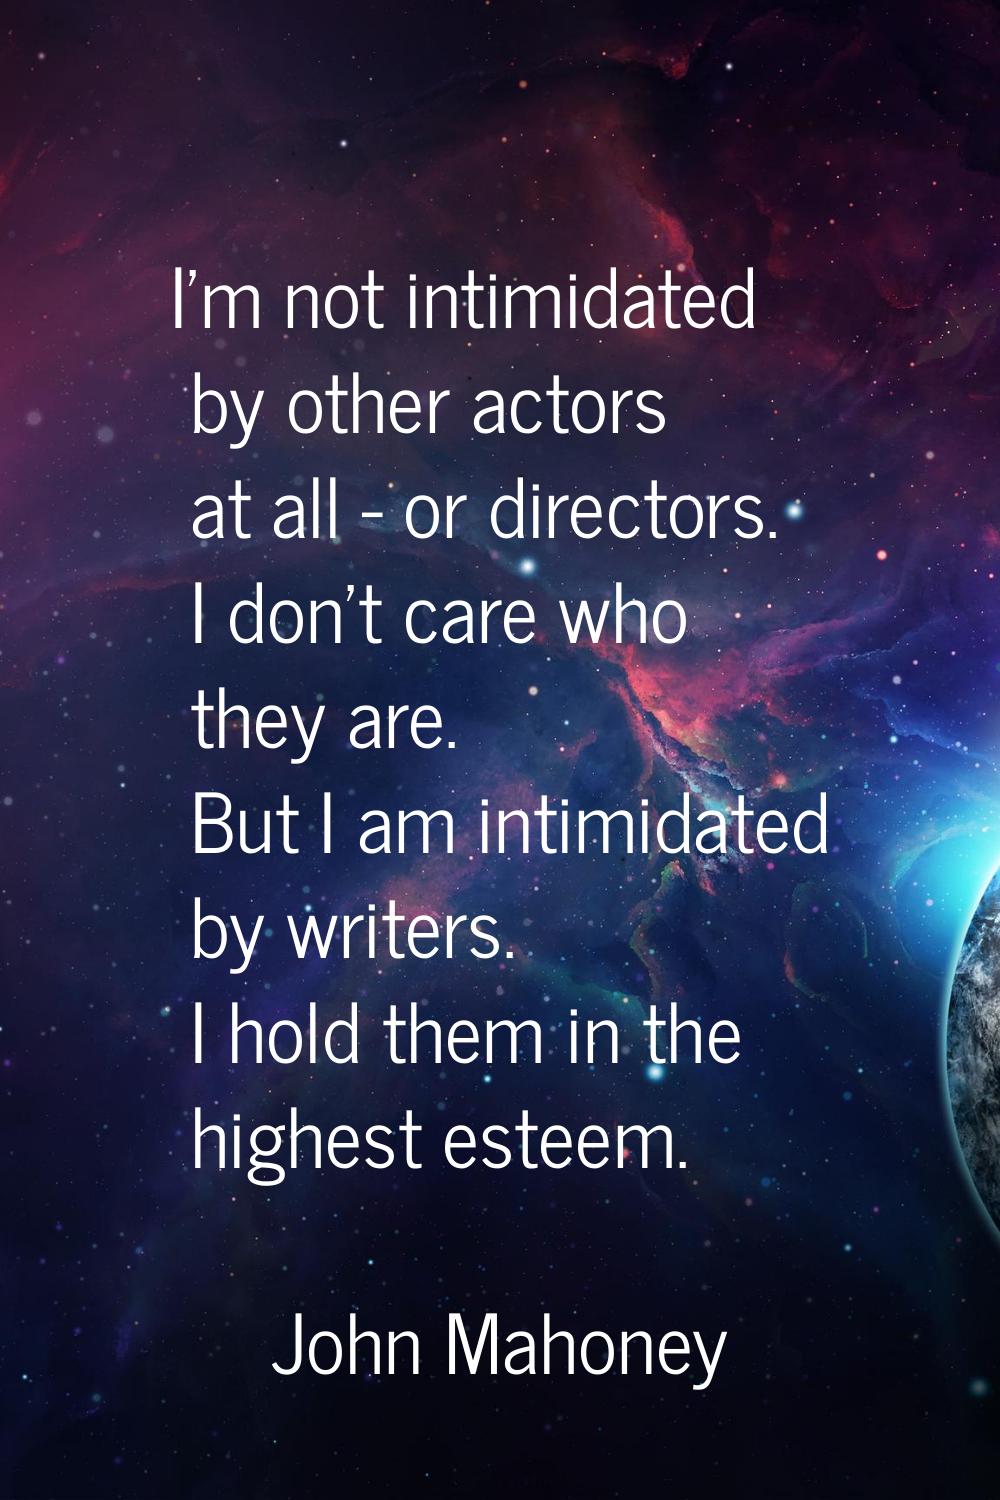 I'm not intimidated by other actors at all - or directors. I don't care who they are. But I am inti